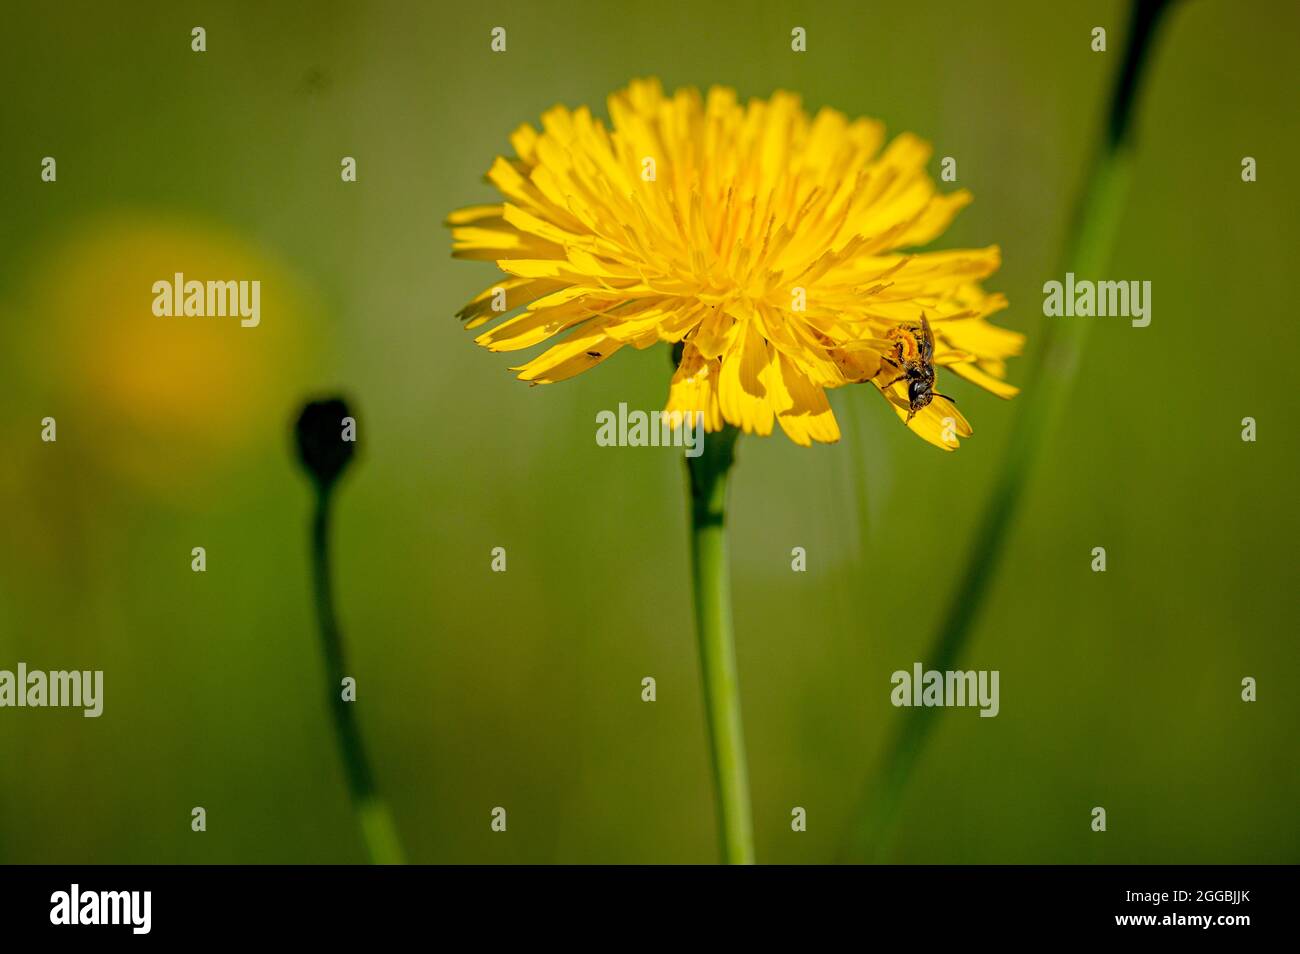 Black soldier fly, hermetia illucens, collecting pollen from a dandelion flower Stock Photo